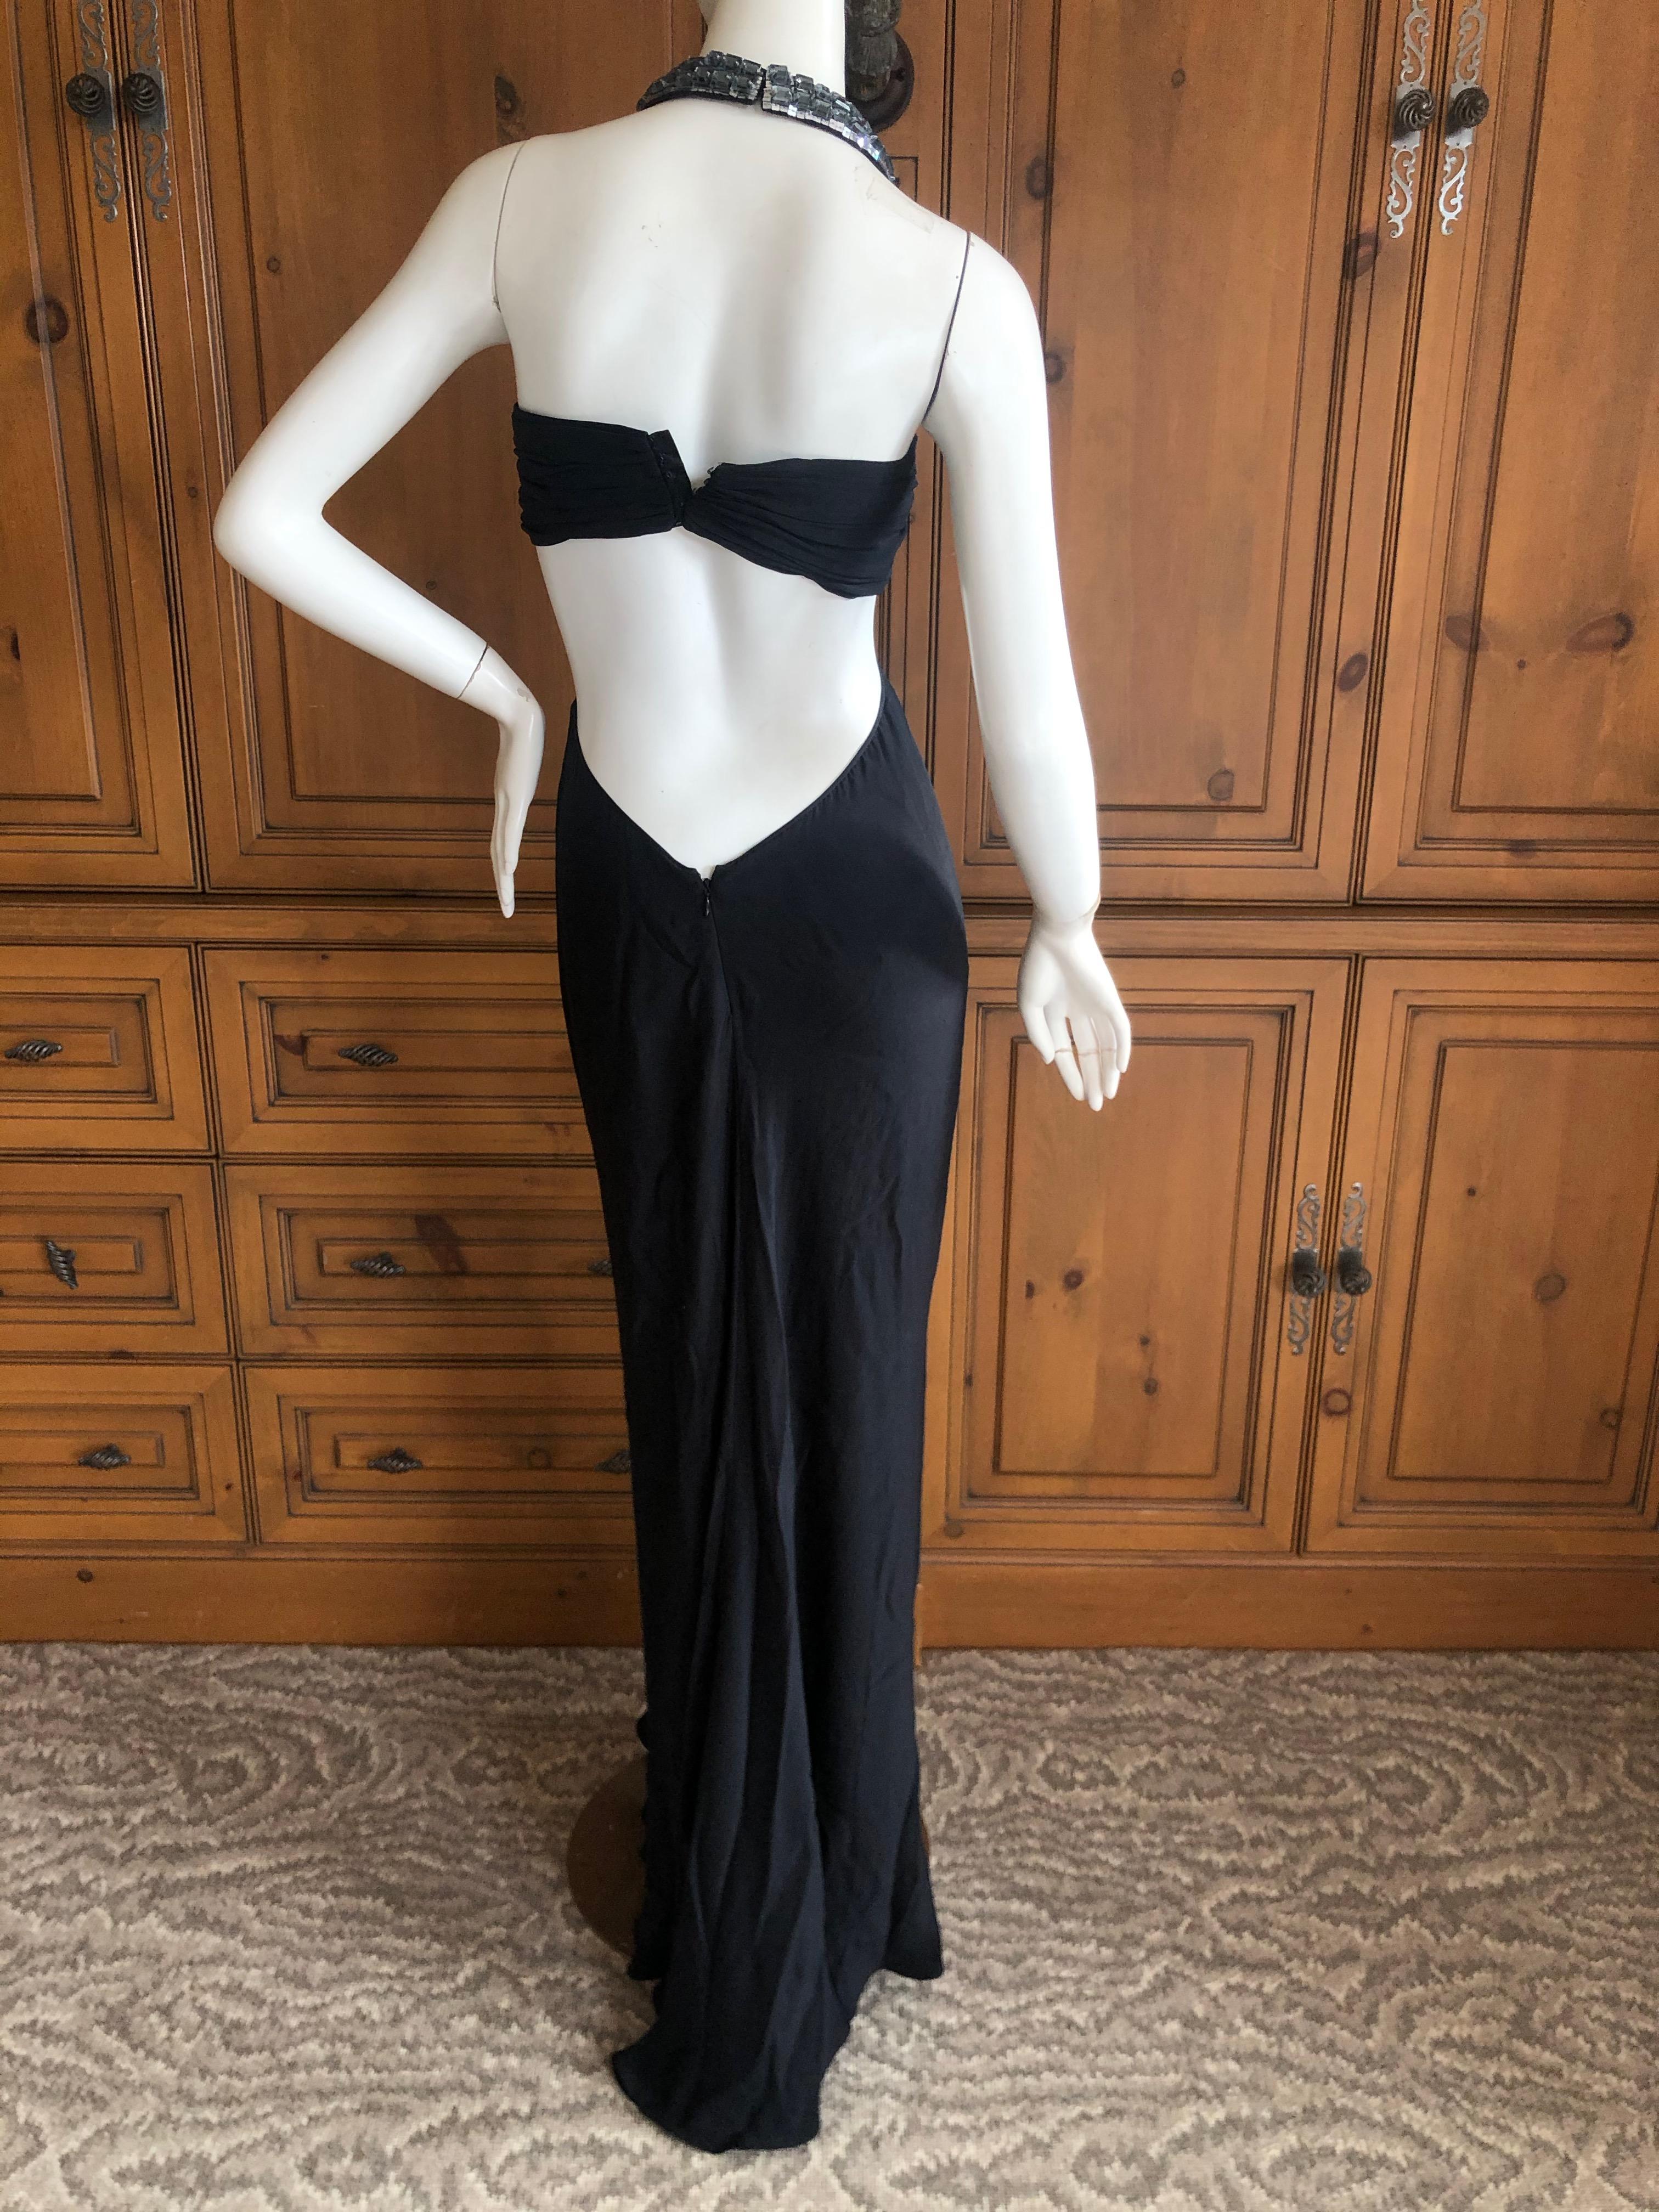 Azzaro Black Cut Out Evening Dress with Bold Crystal Jewel Details For Sale 5